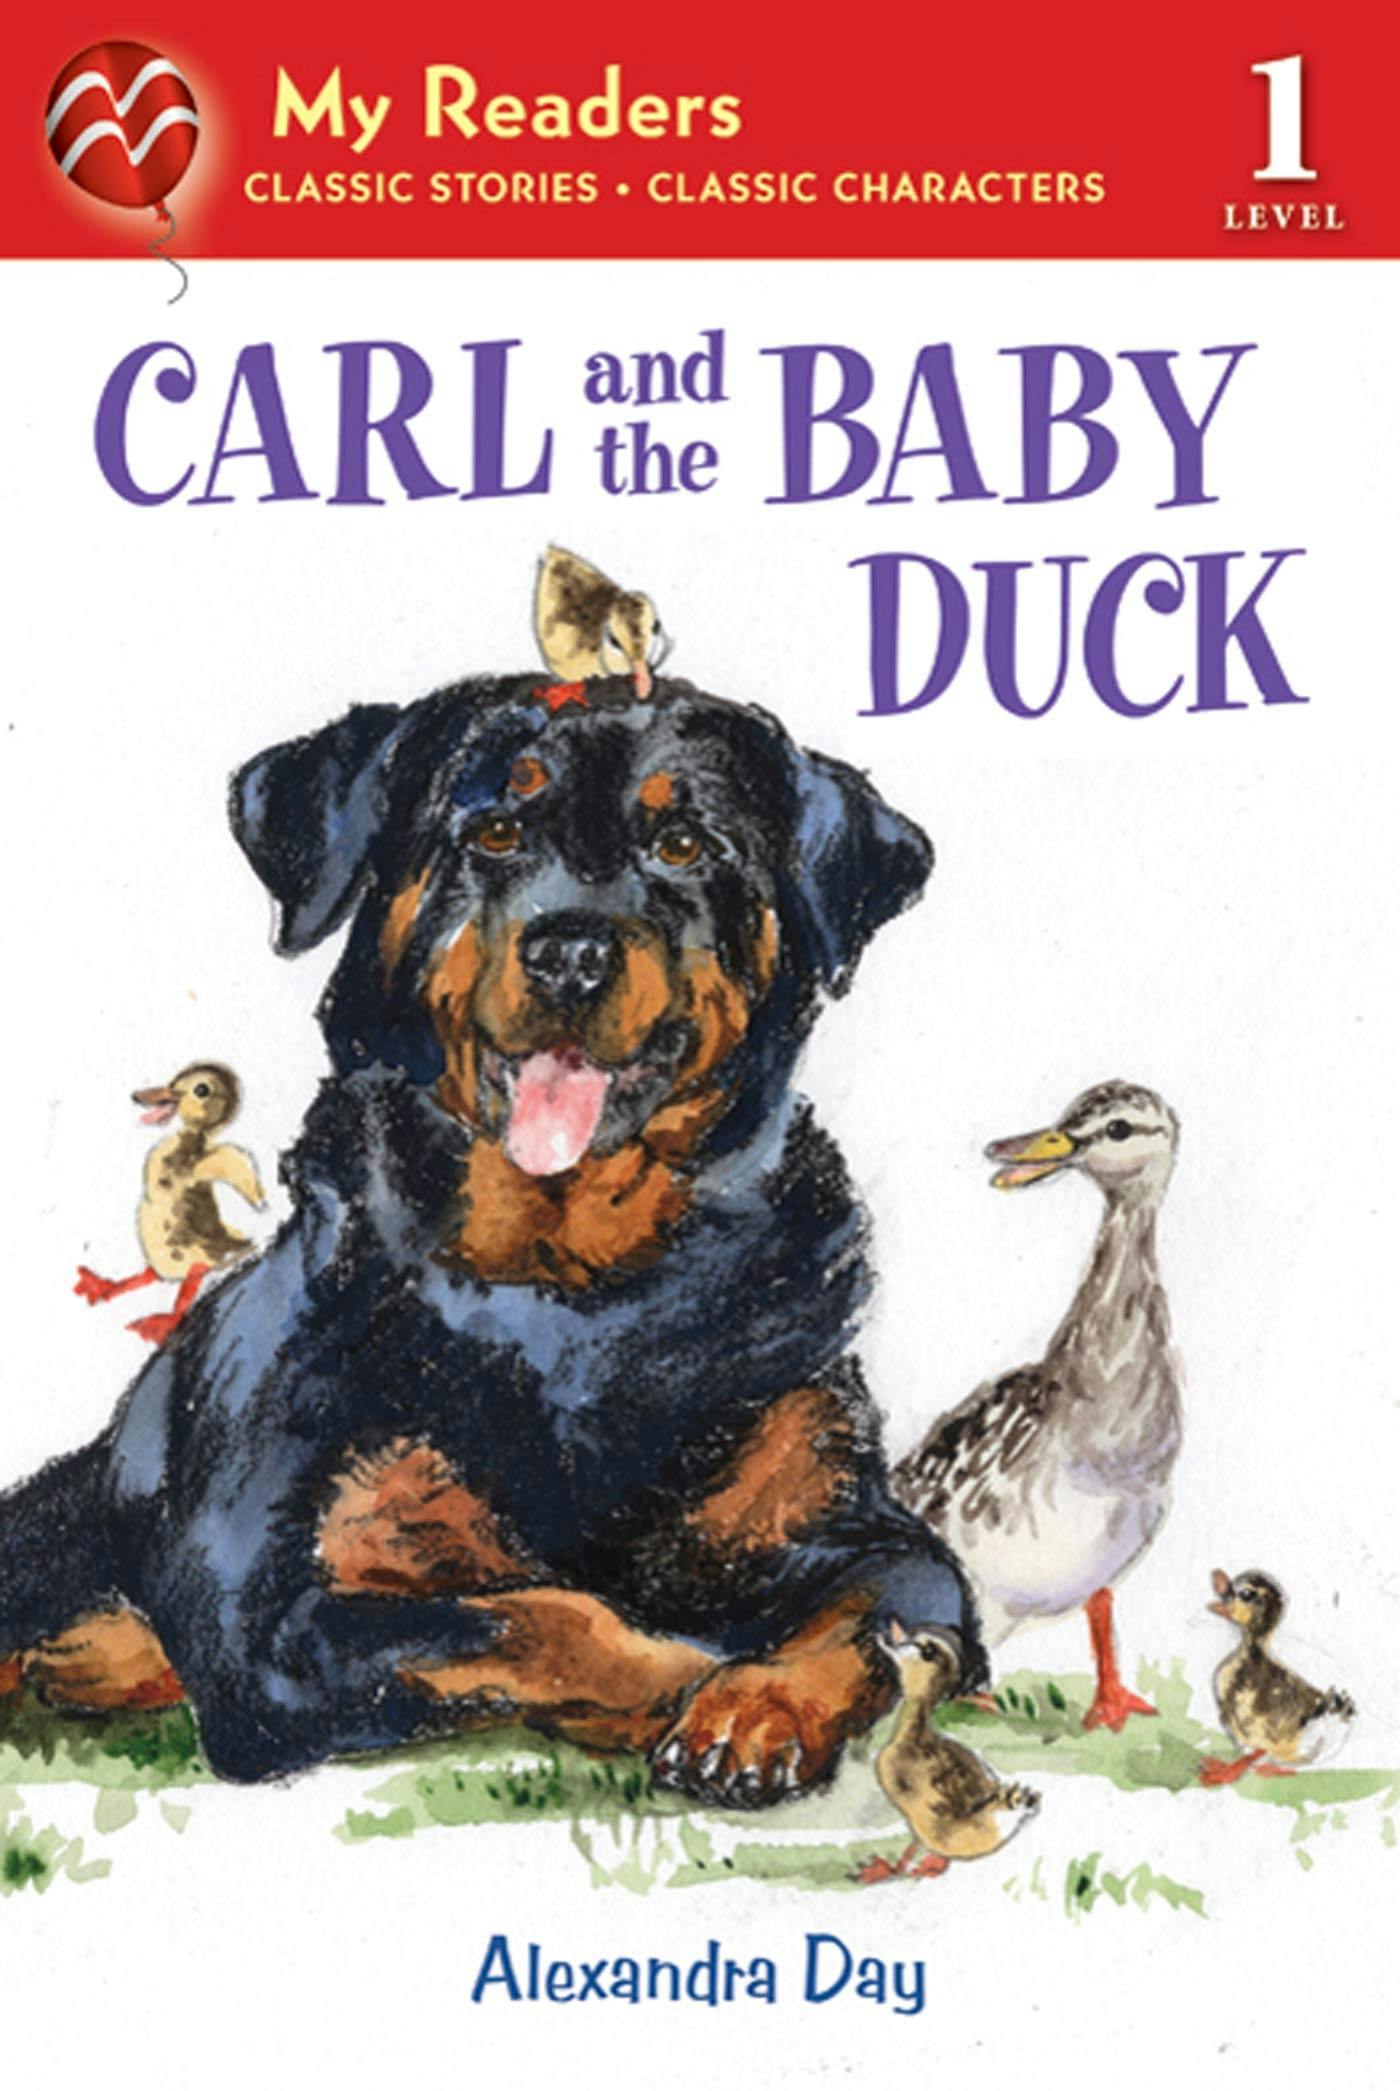 Image of Carl and the Baby Duck